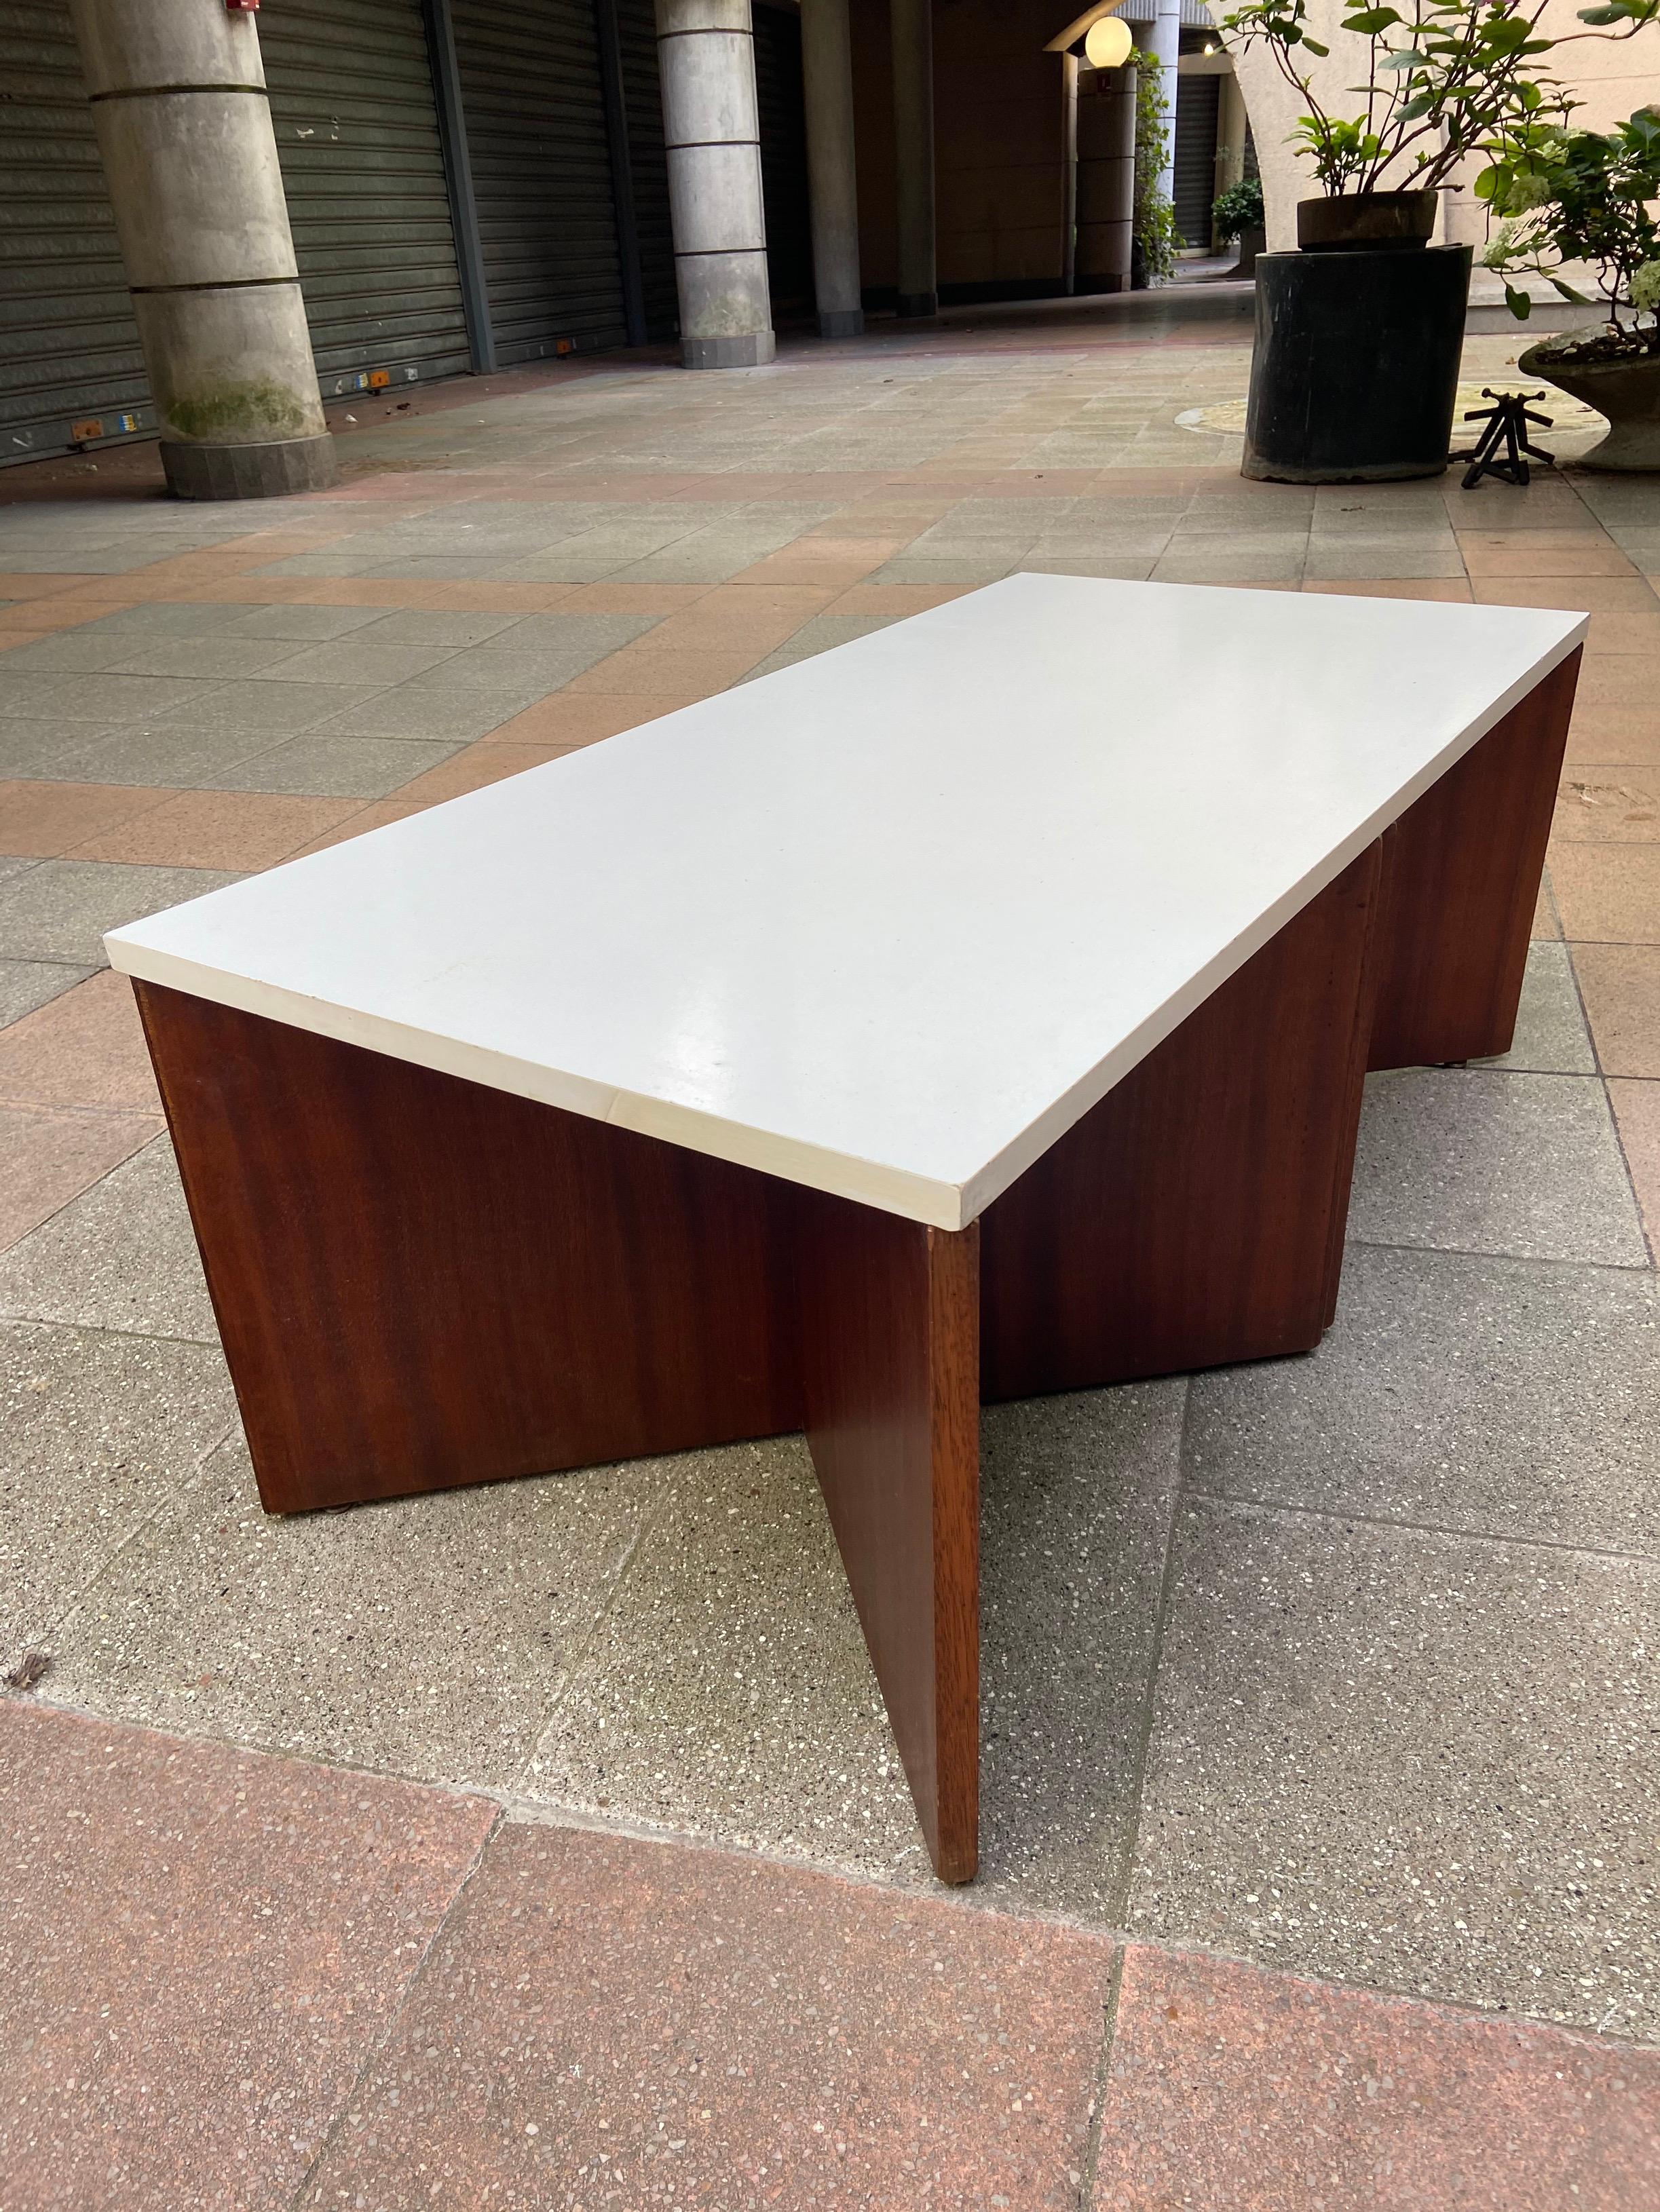 Pierre Guariche
Coffee table, melamine top and rosewood structure
1971
Very good condition
Measures: H 39 x L 100 x P 50 cm.
2 available.
 